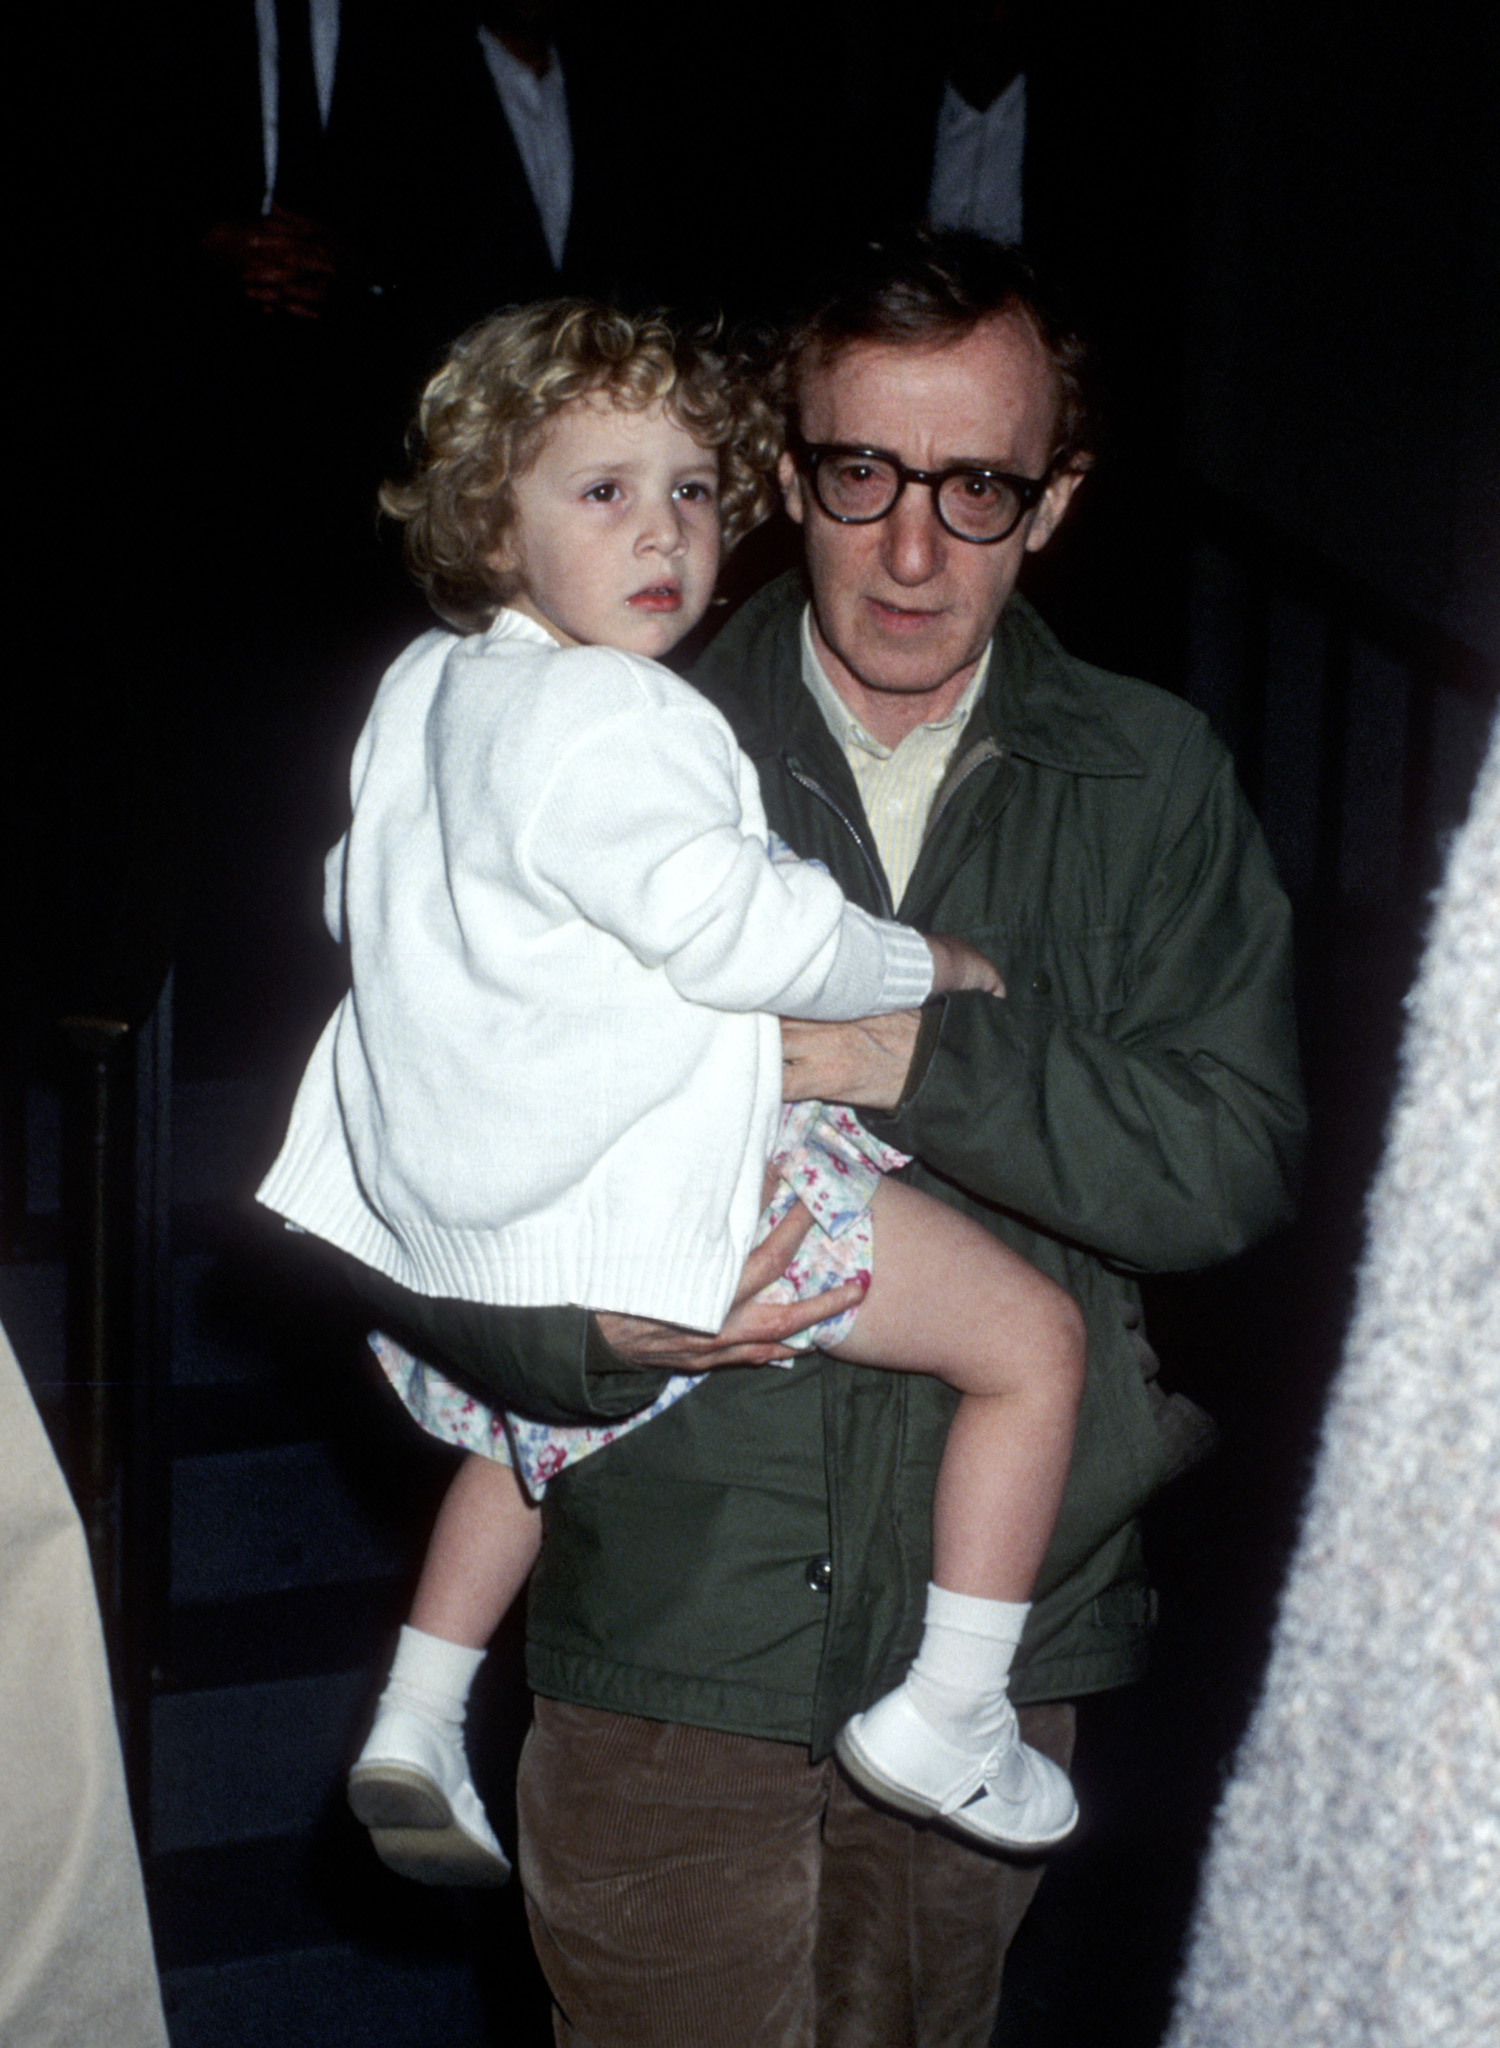 Woody Allen and Dylan Farrow at Mia Farrow's apartment in New York City on May 2, 1989 (Ron Galella&mdash;WireImage)